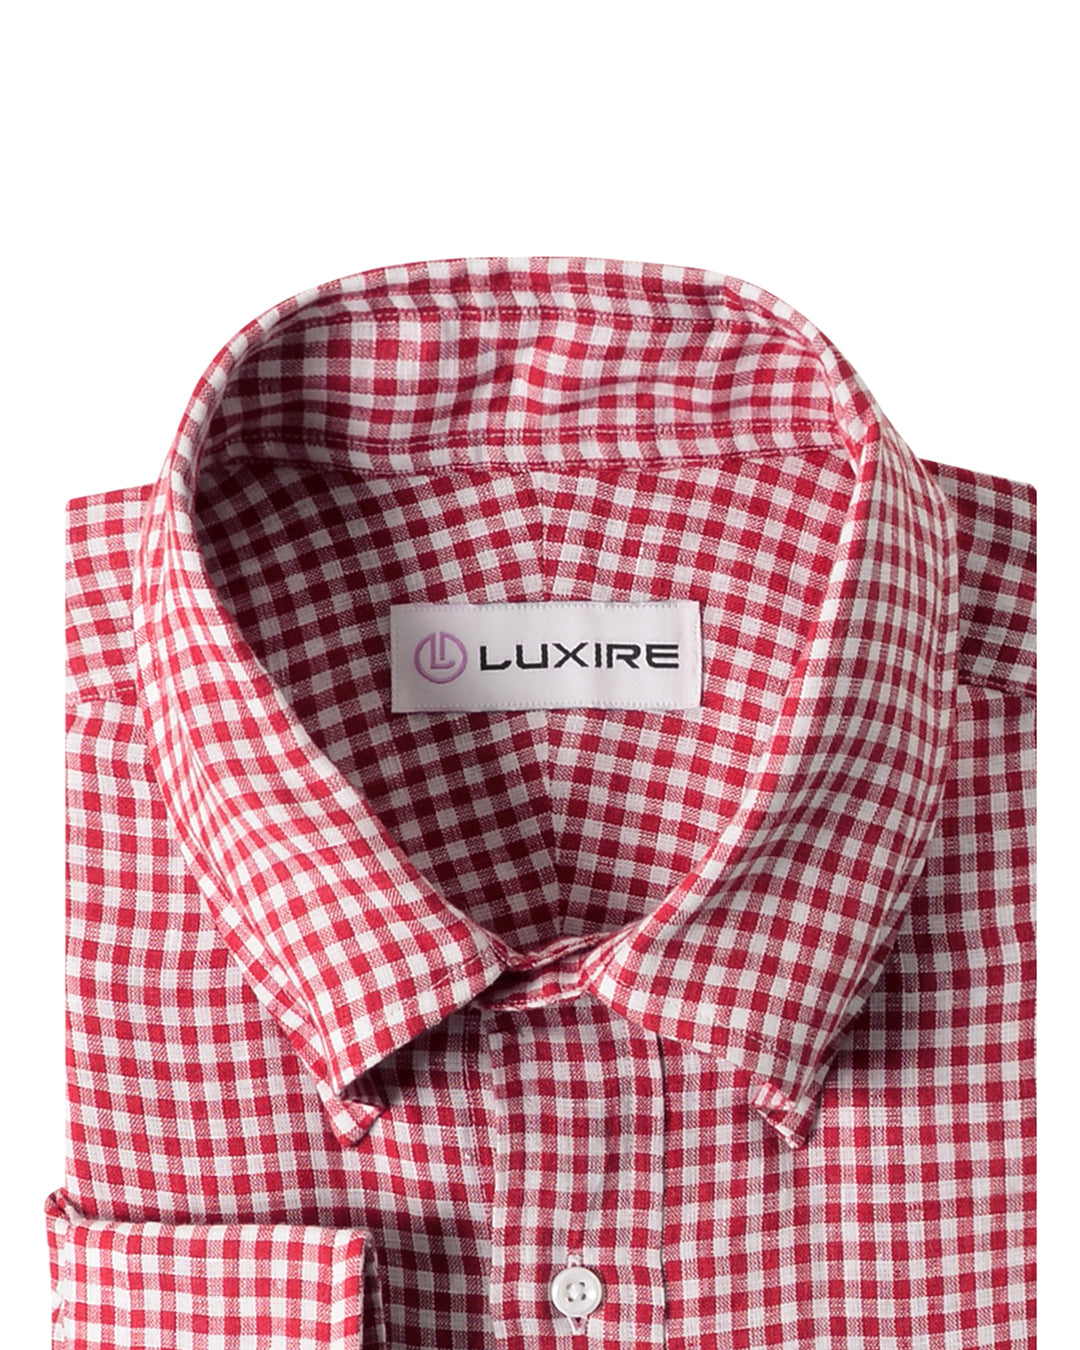 Collar of the custom linen shirt for men in red gingham by Luxire Clothing